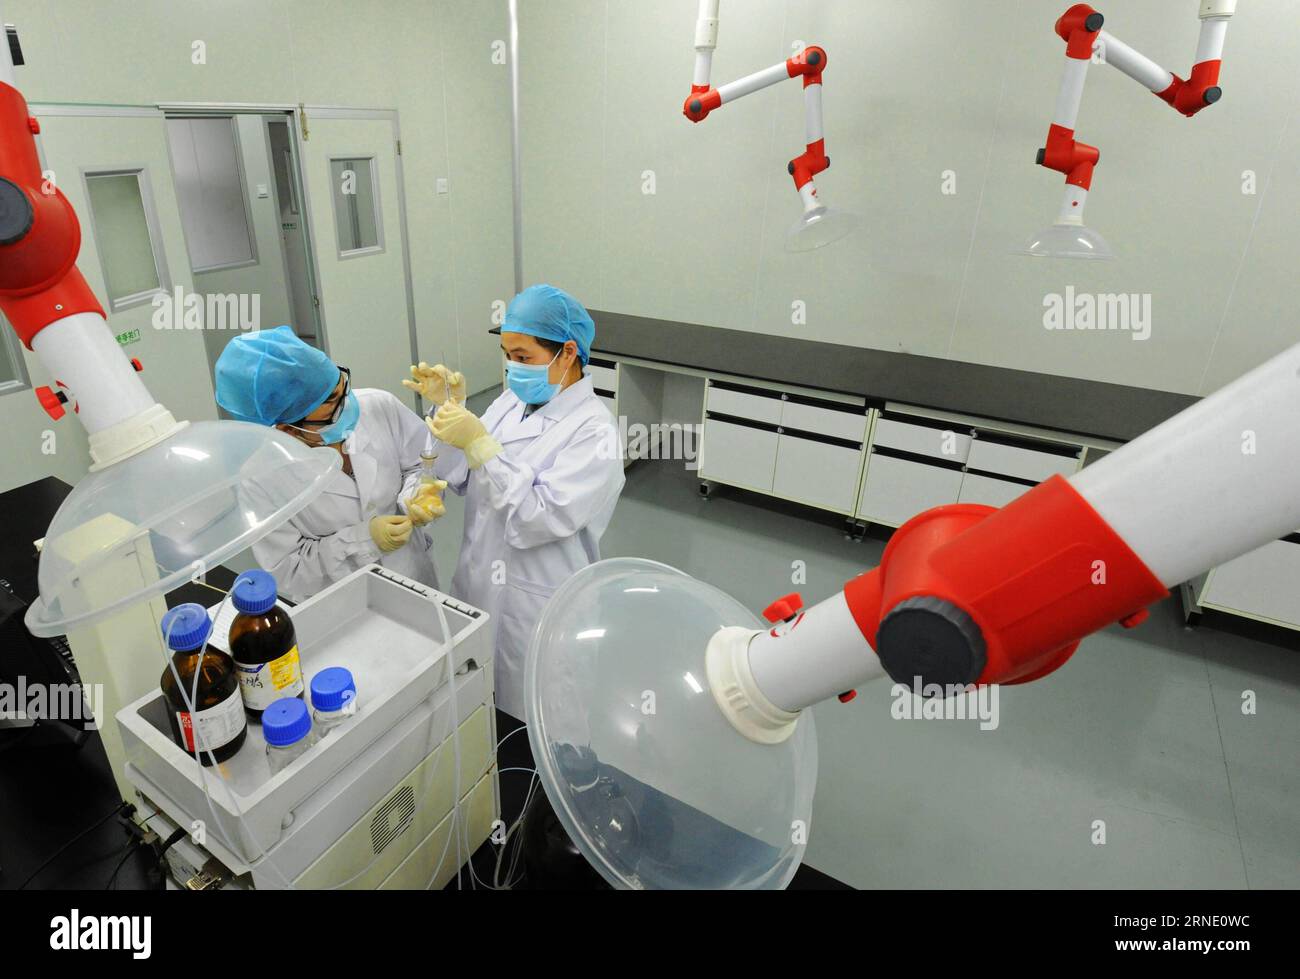 (160605) -- ANJI, June 5, 2016 -- Technicians detect a non-alcohol drink made of bamboo in a biotechnology company in Anji County, east China s Zhejiang Province, June 3, 2016. Anji is known for its pleasant environment with flourishing bamboo plantations and many scenes from the famous movie Crouching Tiger, Hidden Dragon were shot here. The county persists in green, low-carbon development, and strives to protect environment as well as to develop local economy. June 5 is observed as World Environment Day every year, and this year s theme issued by China s Ministry of Environment Protection is Stock Photo